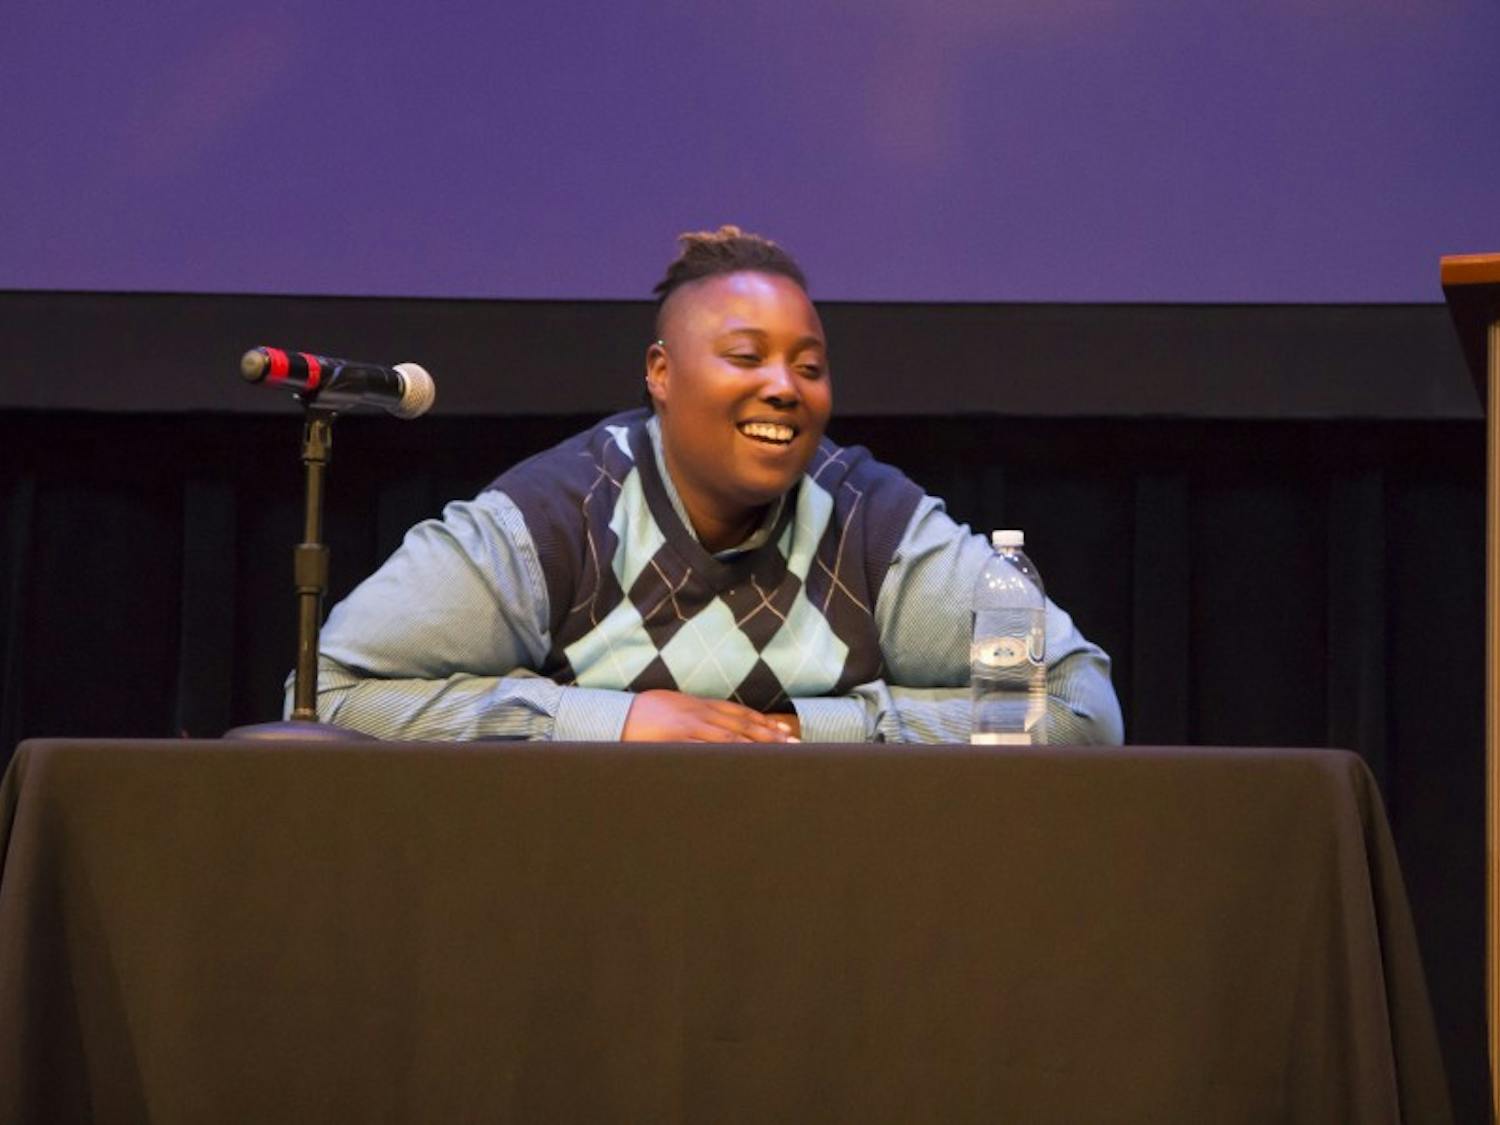 UW-Madison graduate and mental wellness advocate Ti Banks shared his tactics to succeed in social justice and encouraged others to practice those as well in his Disability Awareness Week talk Tuesday.